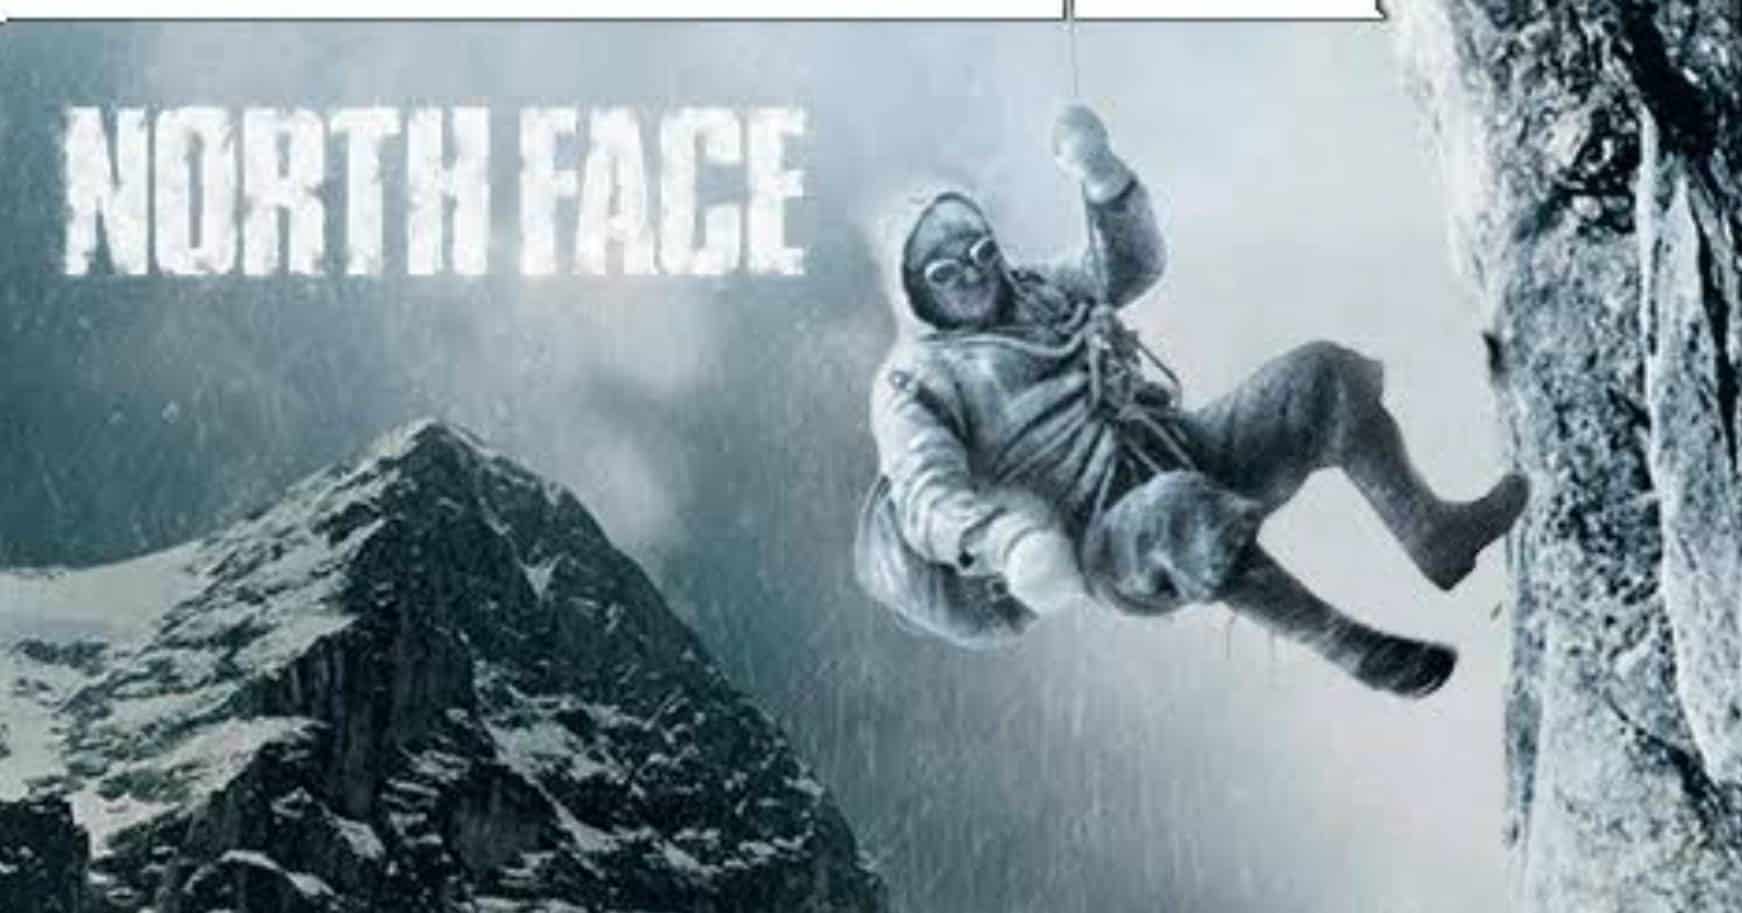 North Face- Based On True Events